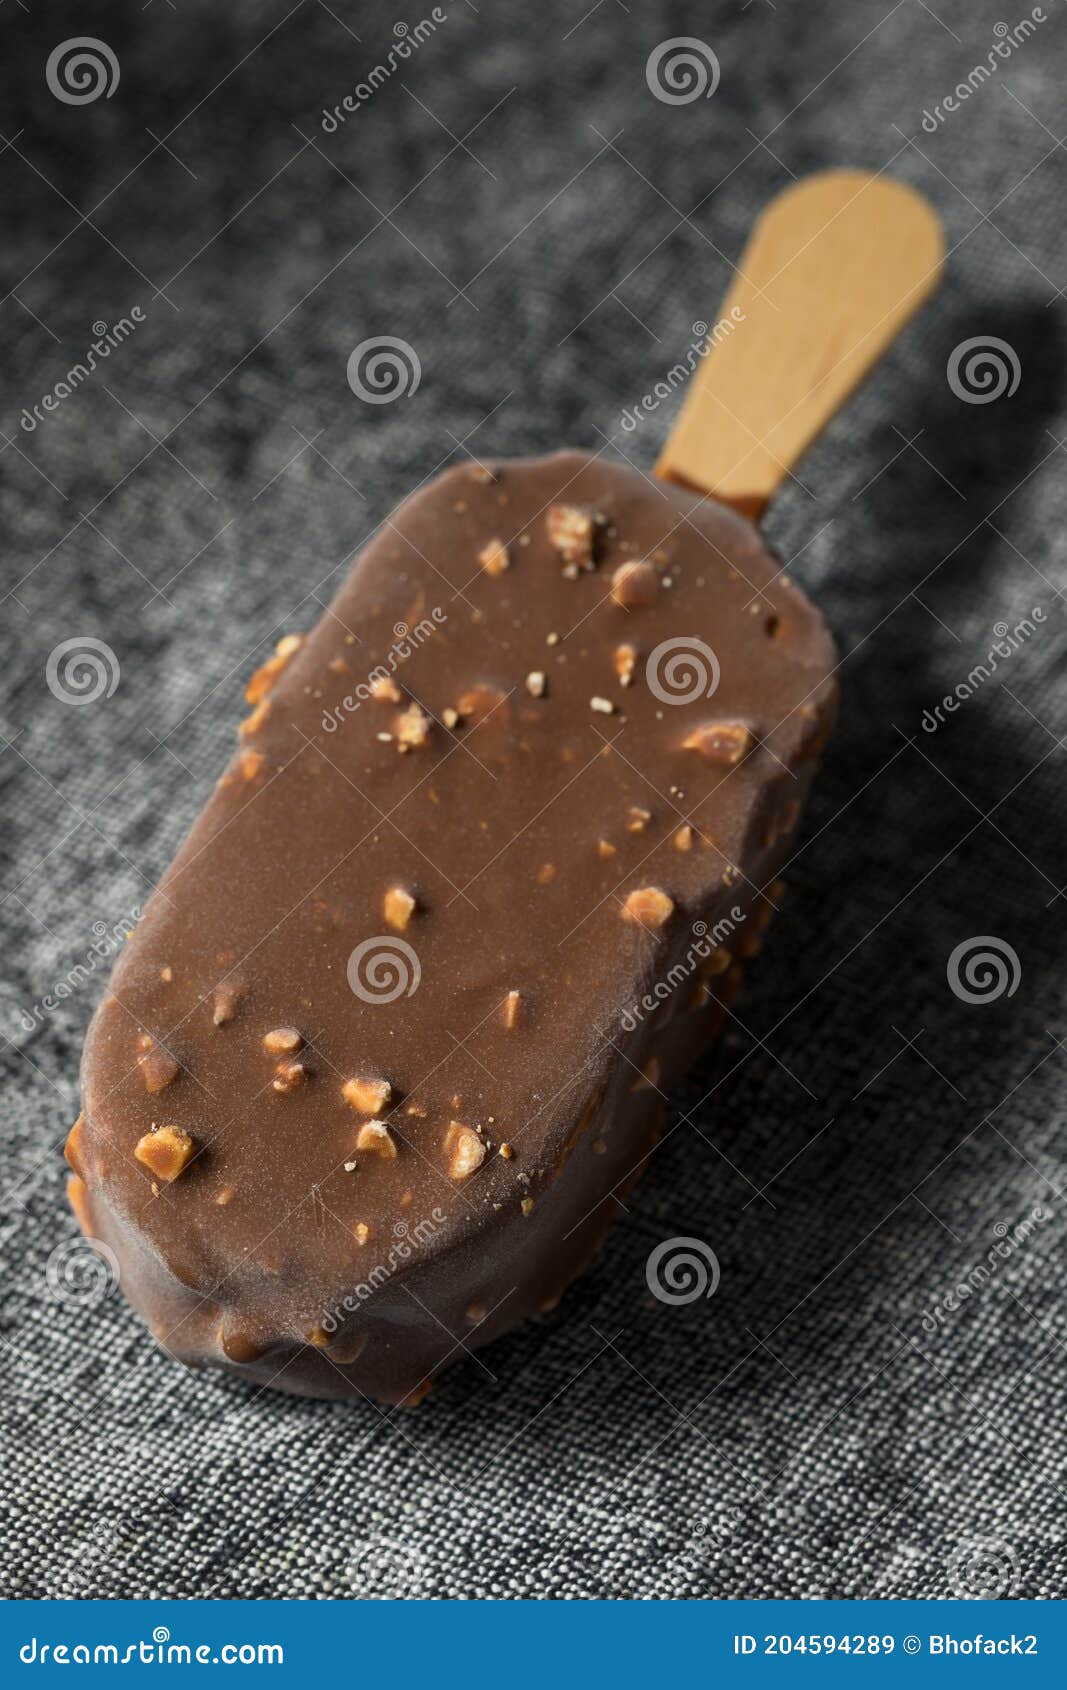 Frozen Chocolate Covered Ice Cream Bars Stock Image - Image of snack ...